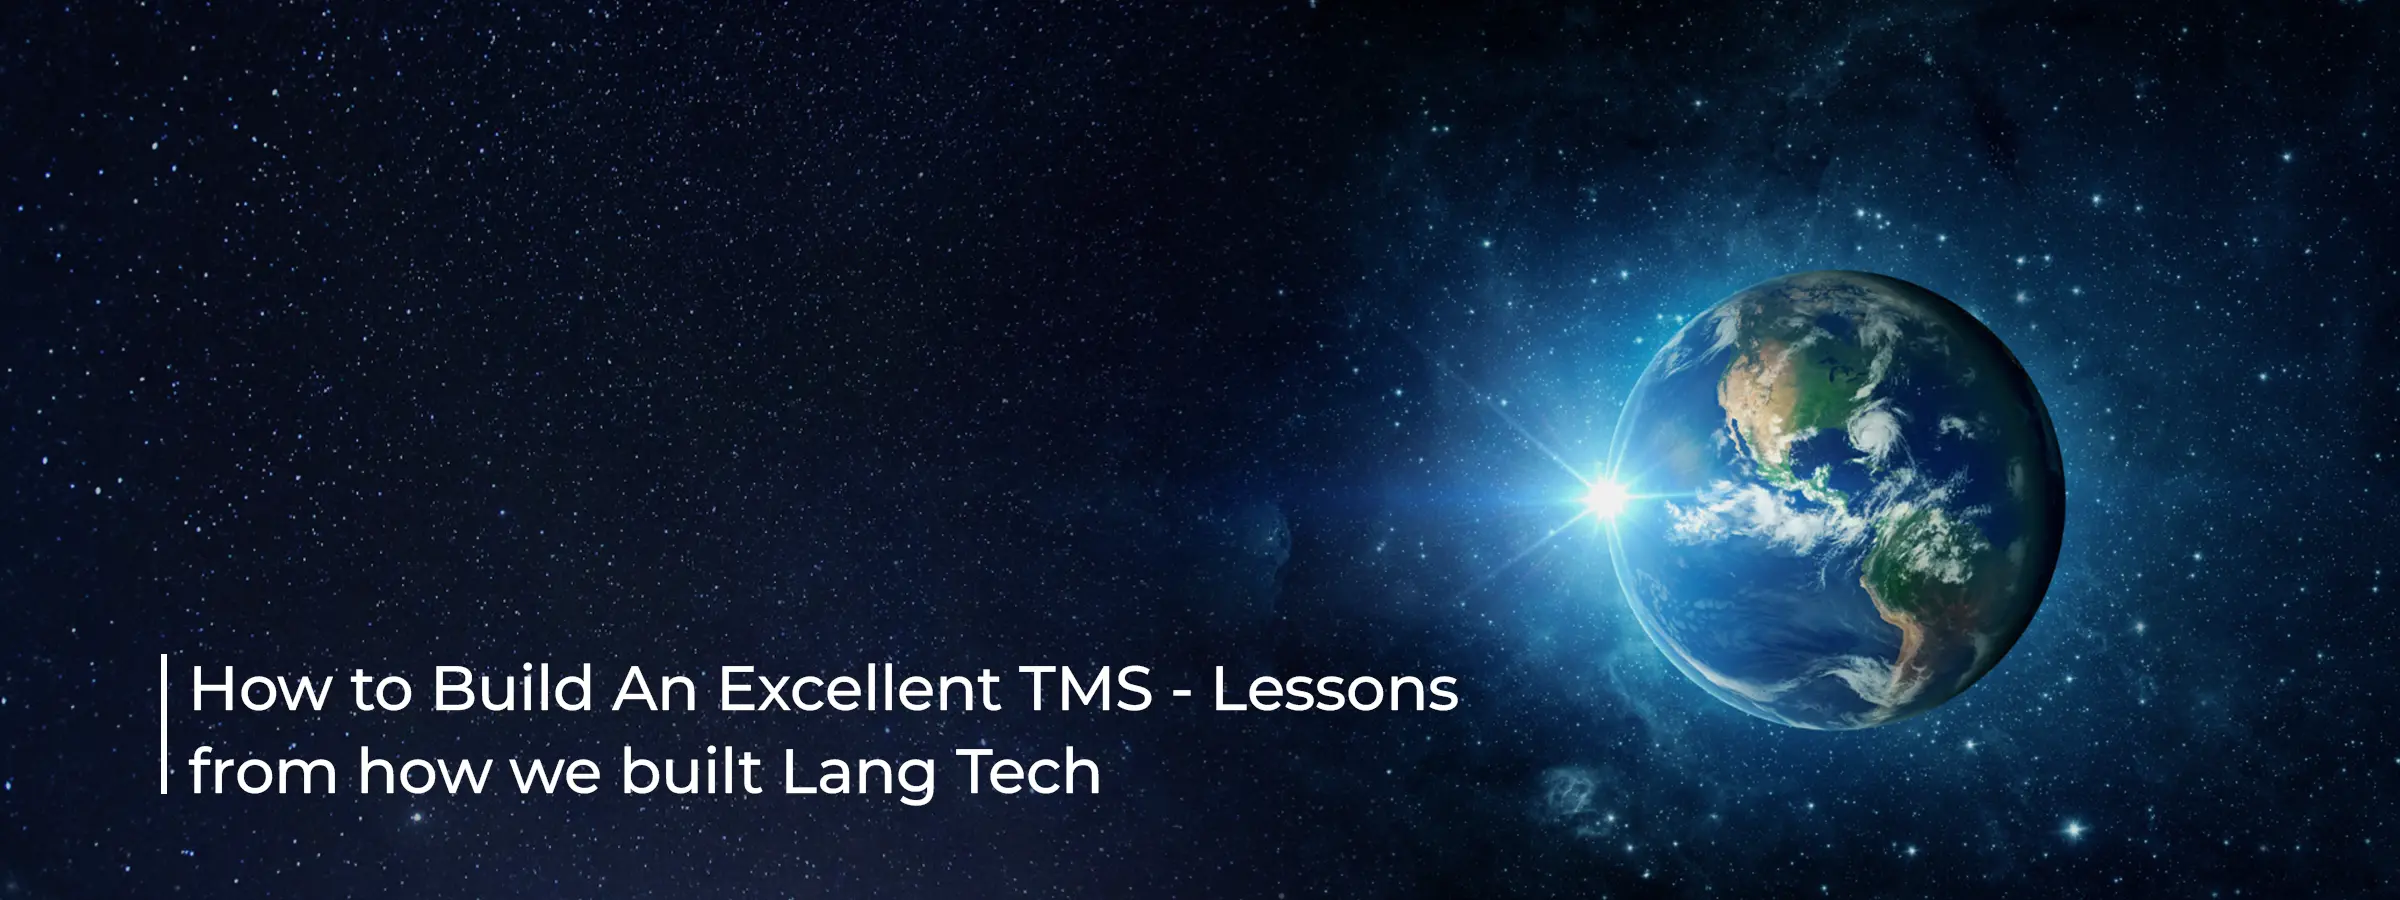 how-to-build-an-excellent-tms-lessons-from-how-we-built-lang-tech